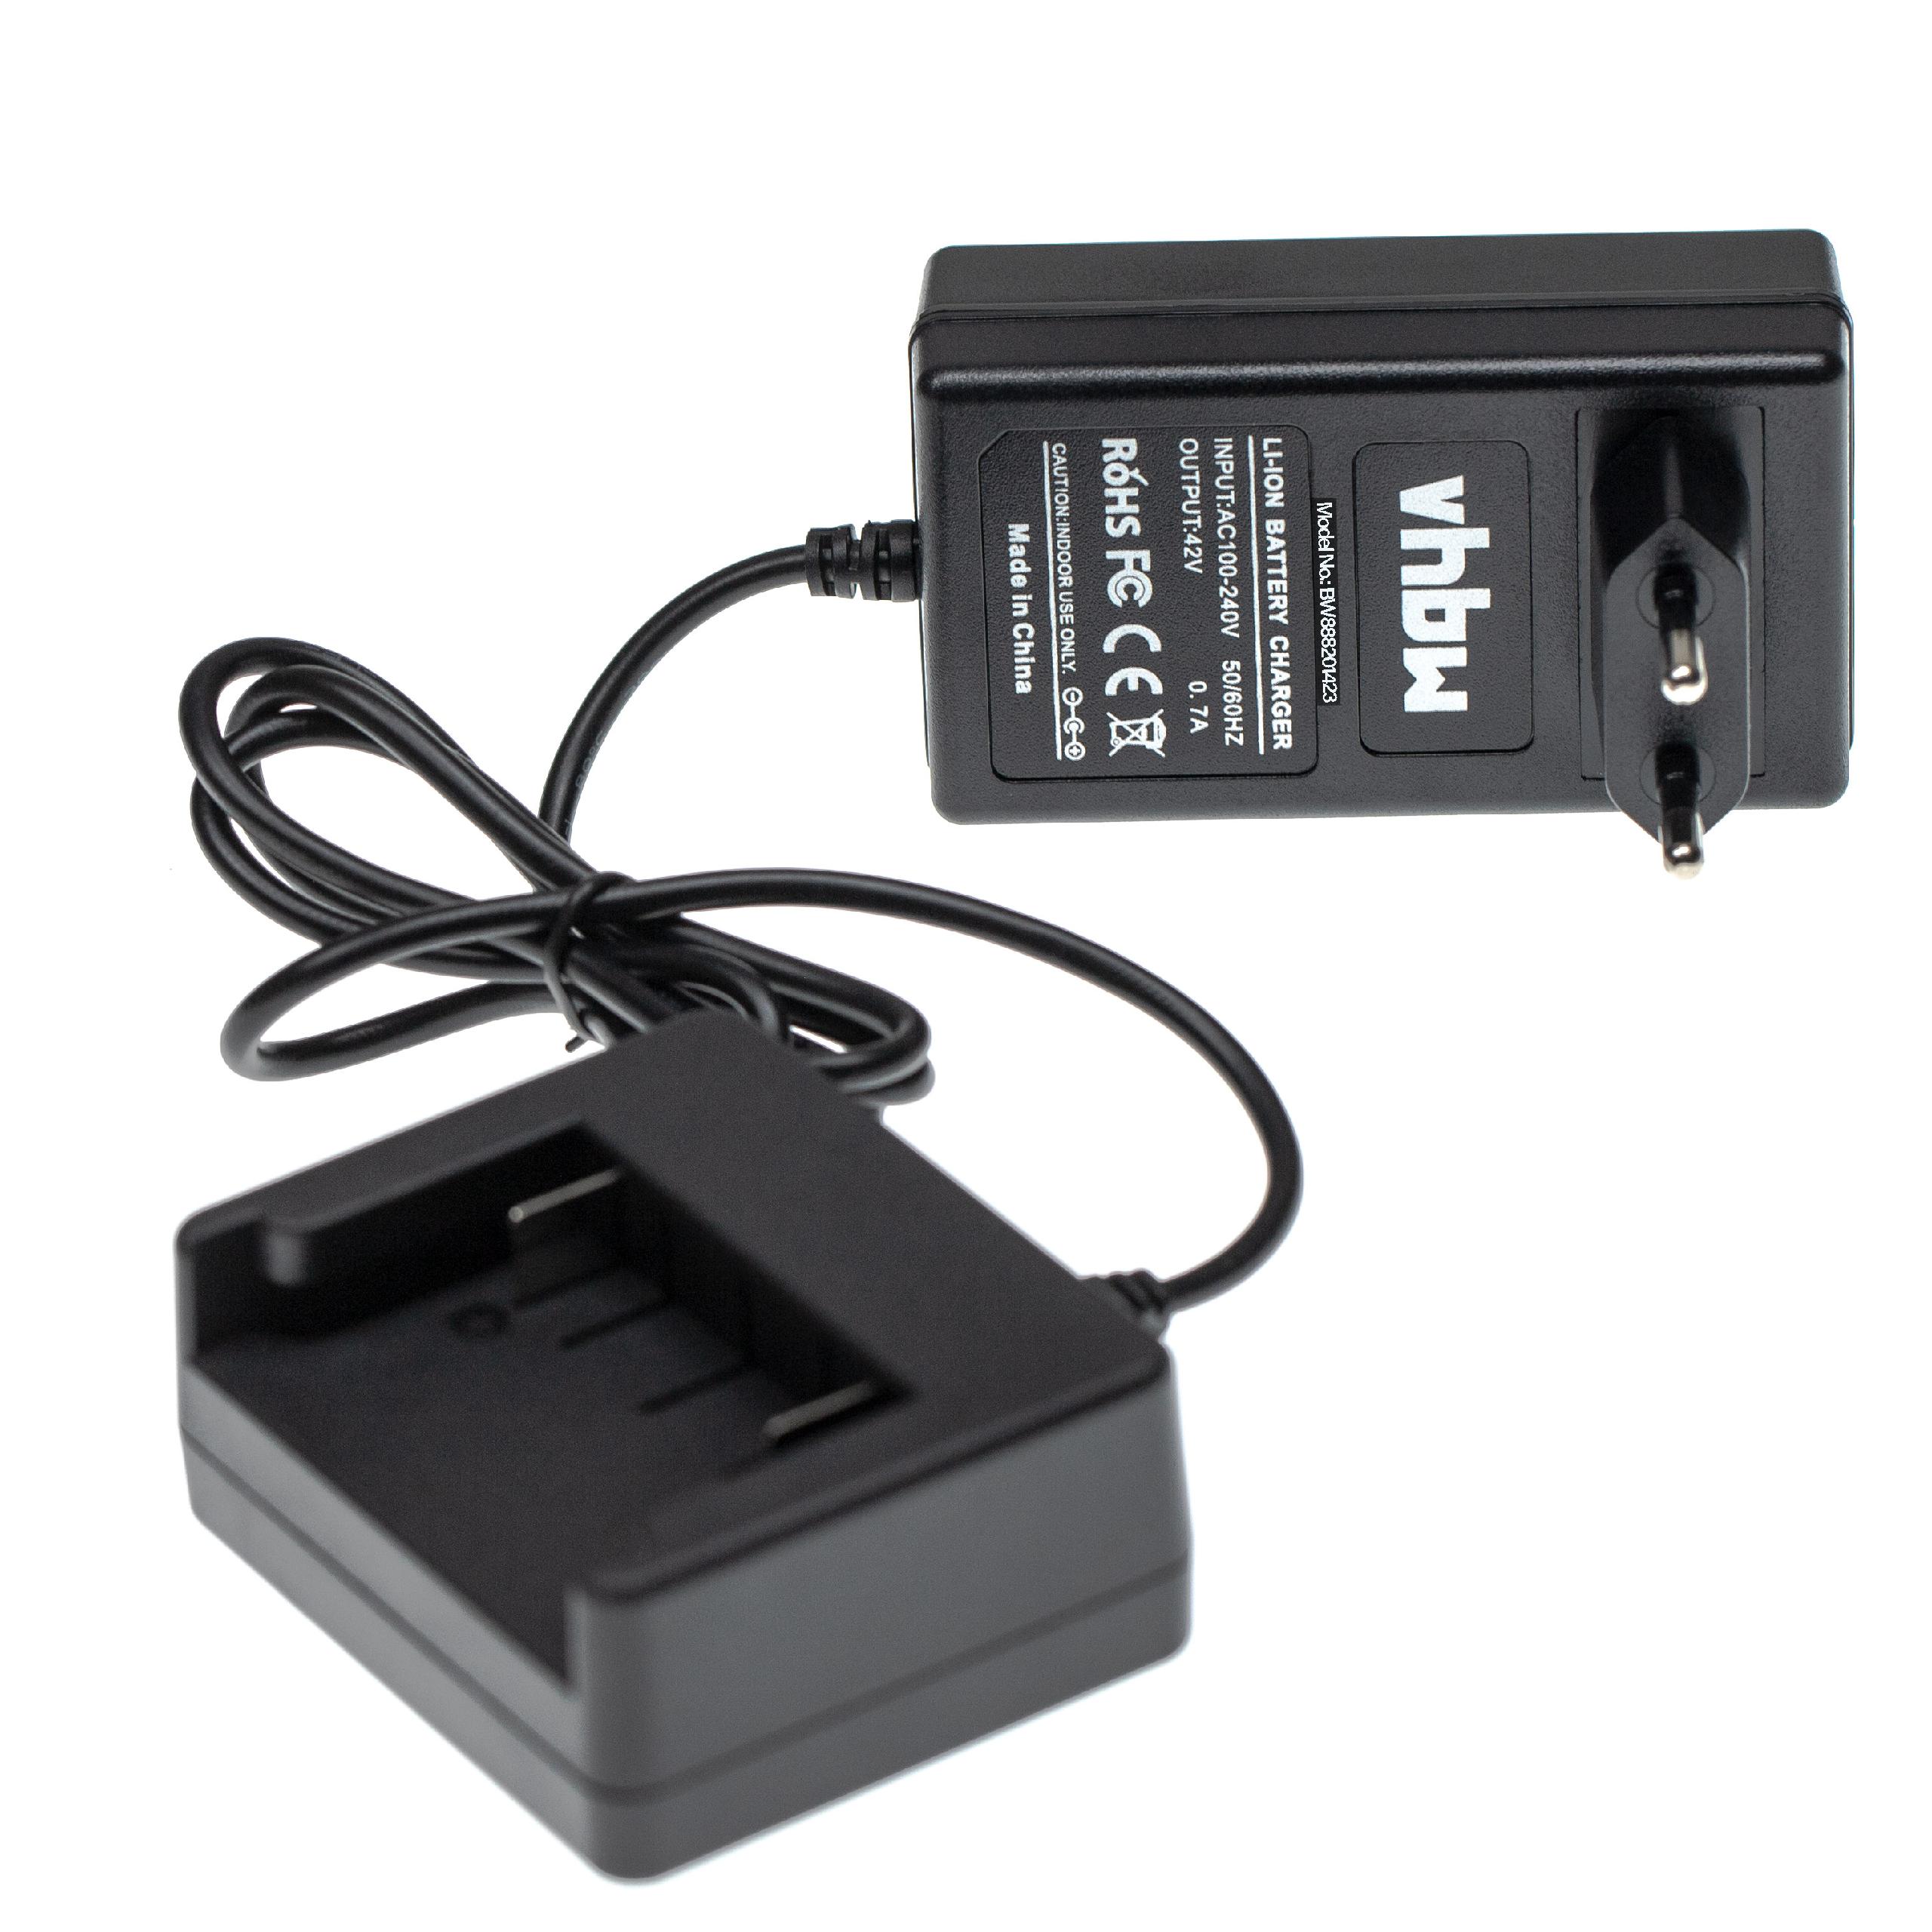 Charger suitable for 11536C Bosch, 11536C Power Tool Batteries etc. Li-Ion 42V